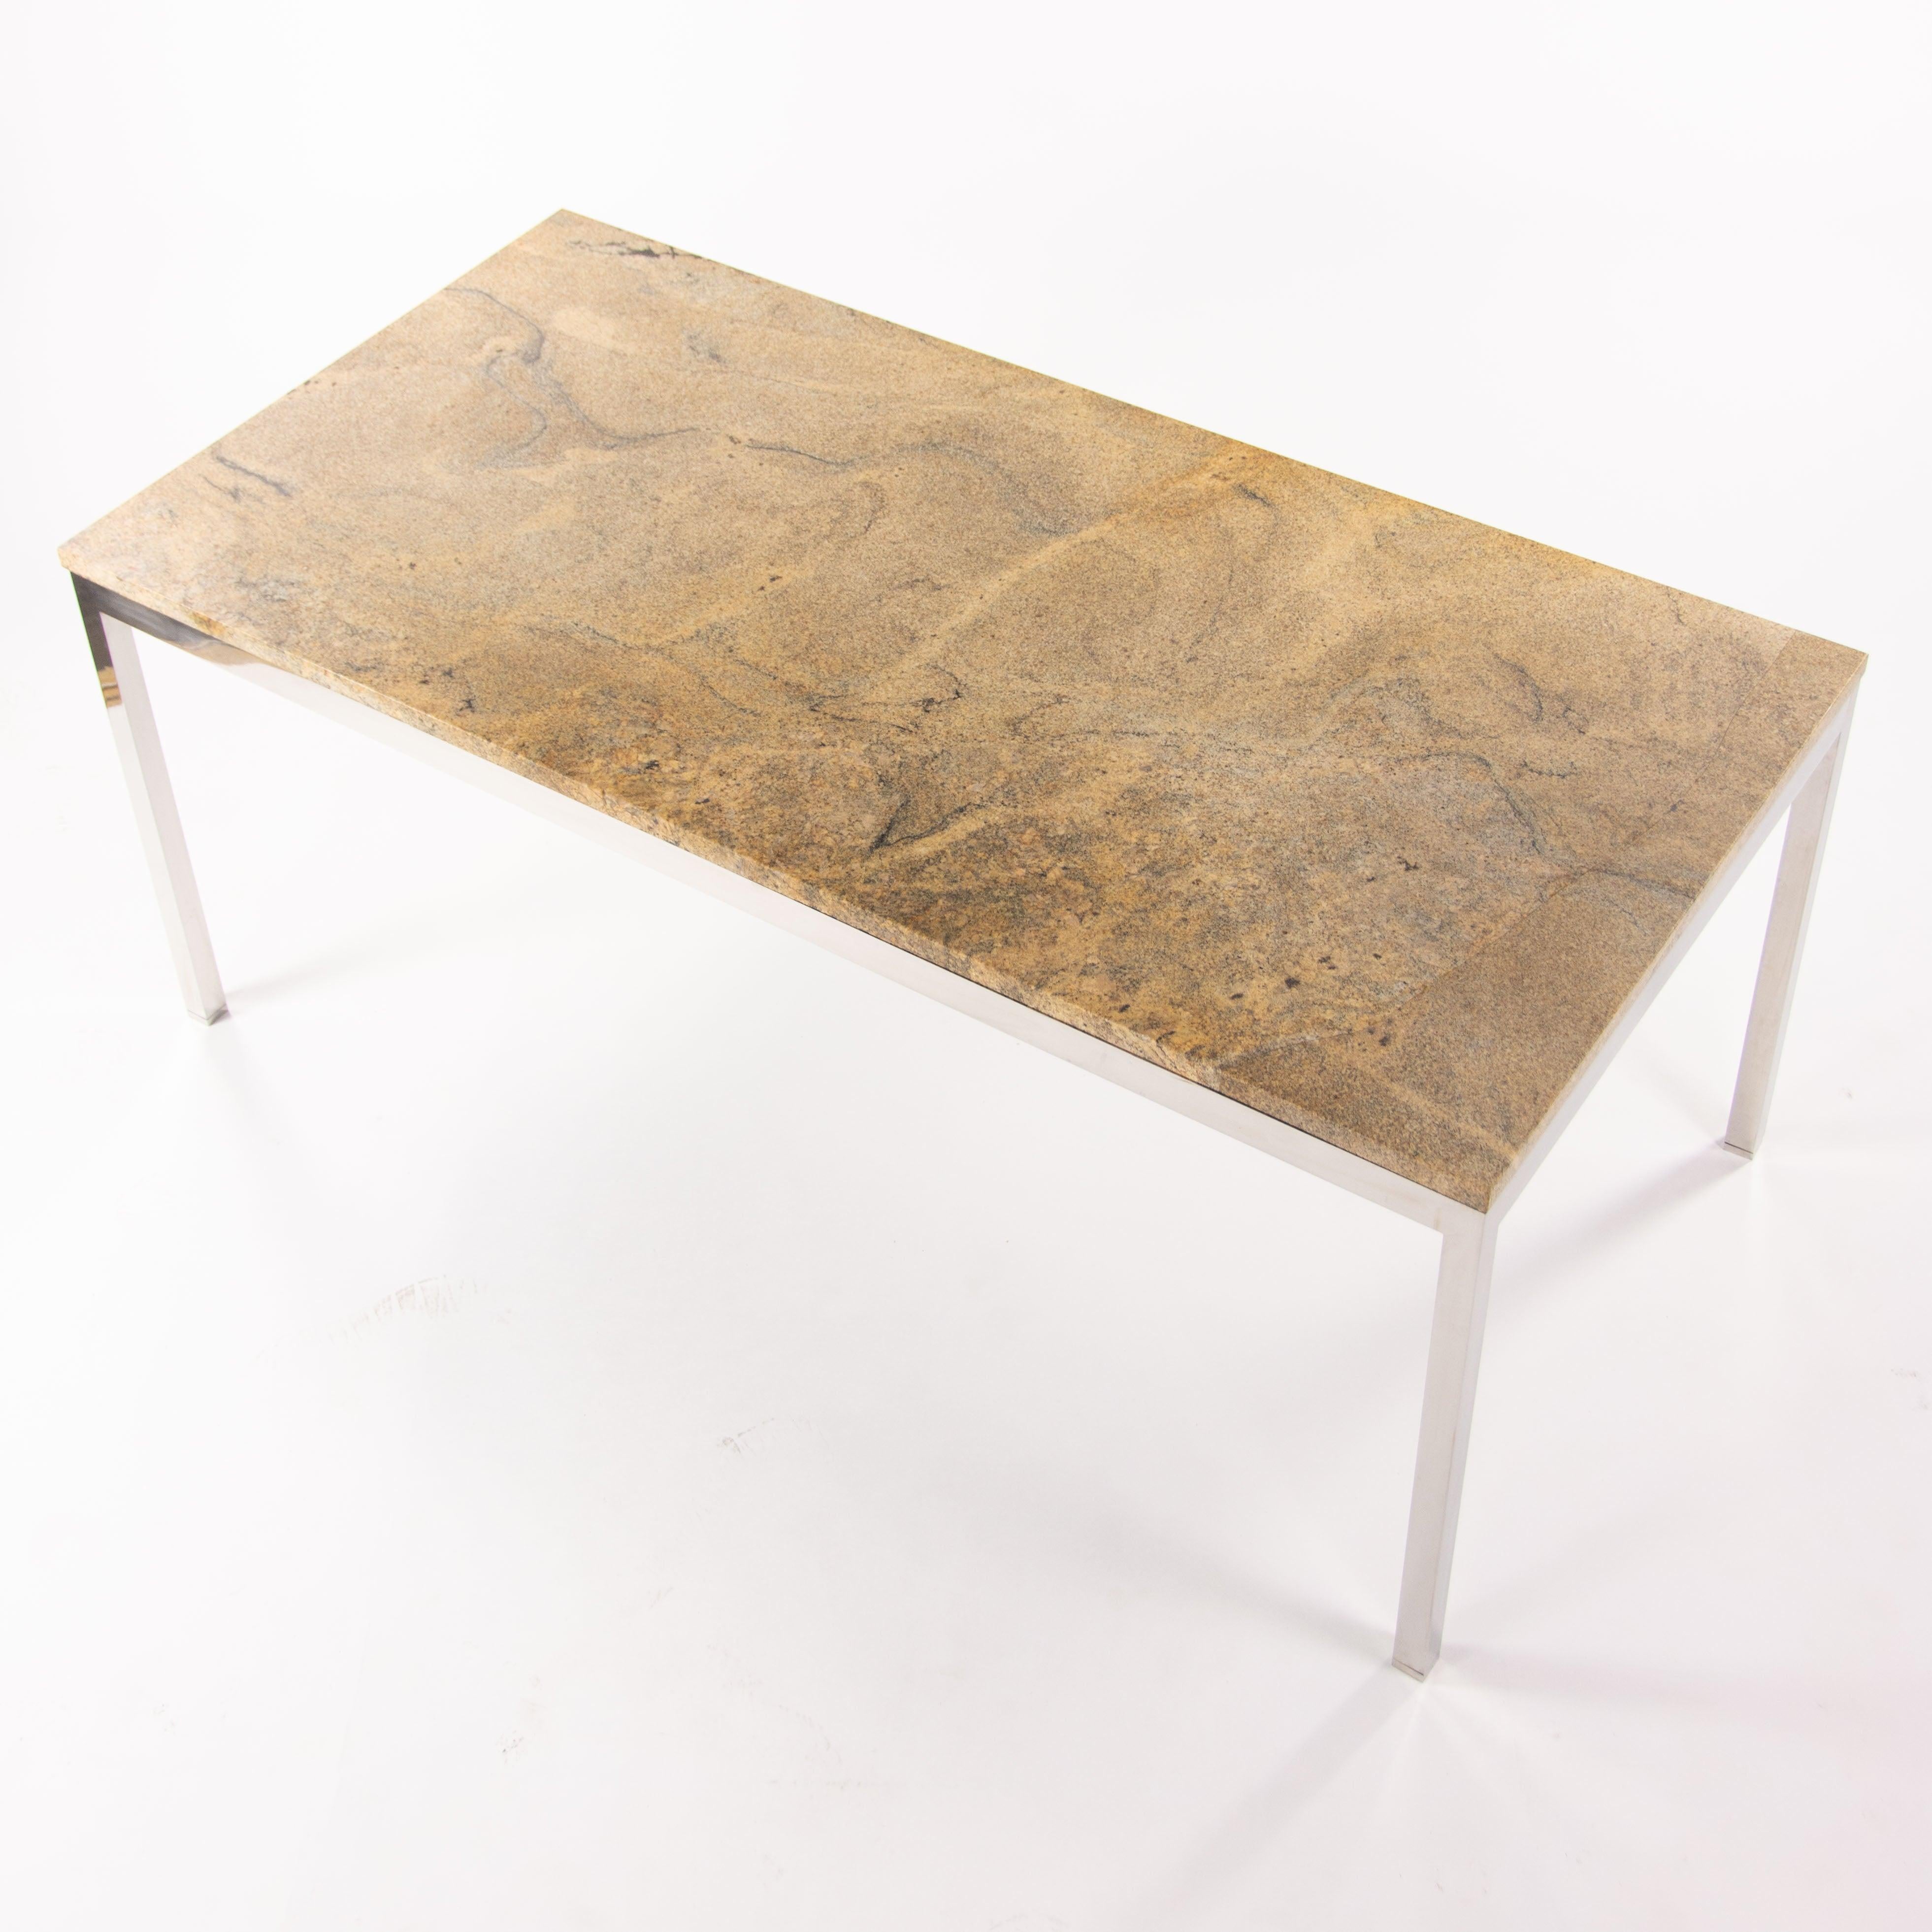 Listed for sale is a stunning custom contract stone desk/conference/dining table in exceptionally nice condition. The top has some light wear and was used as an executive desk. See photos for condition. 
List price on this piece is $8-10k This